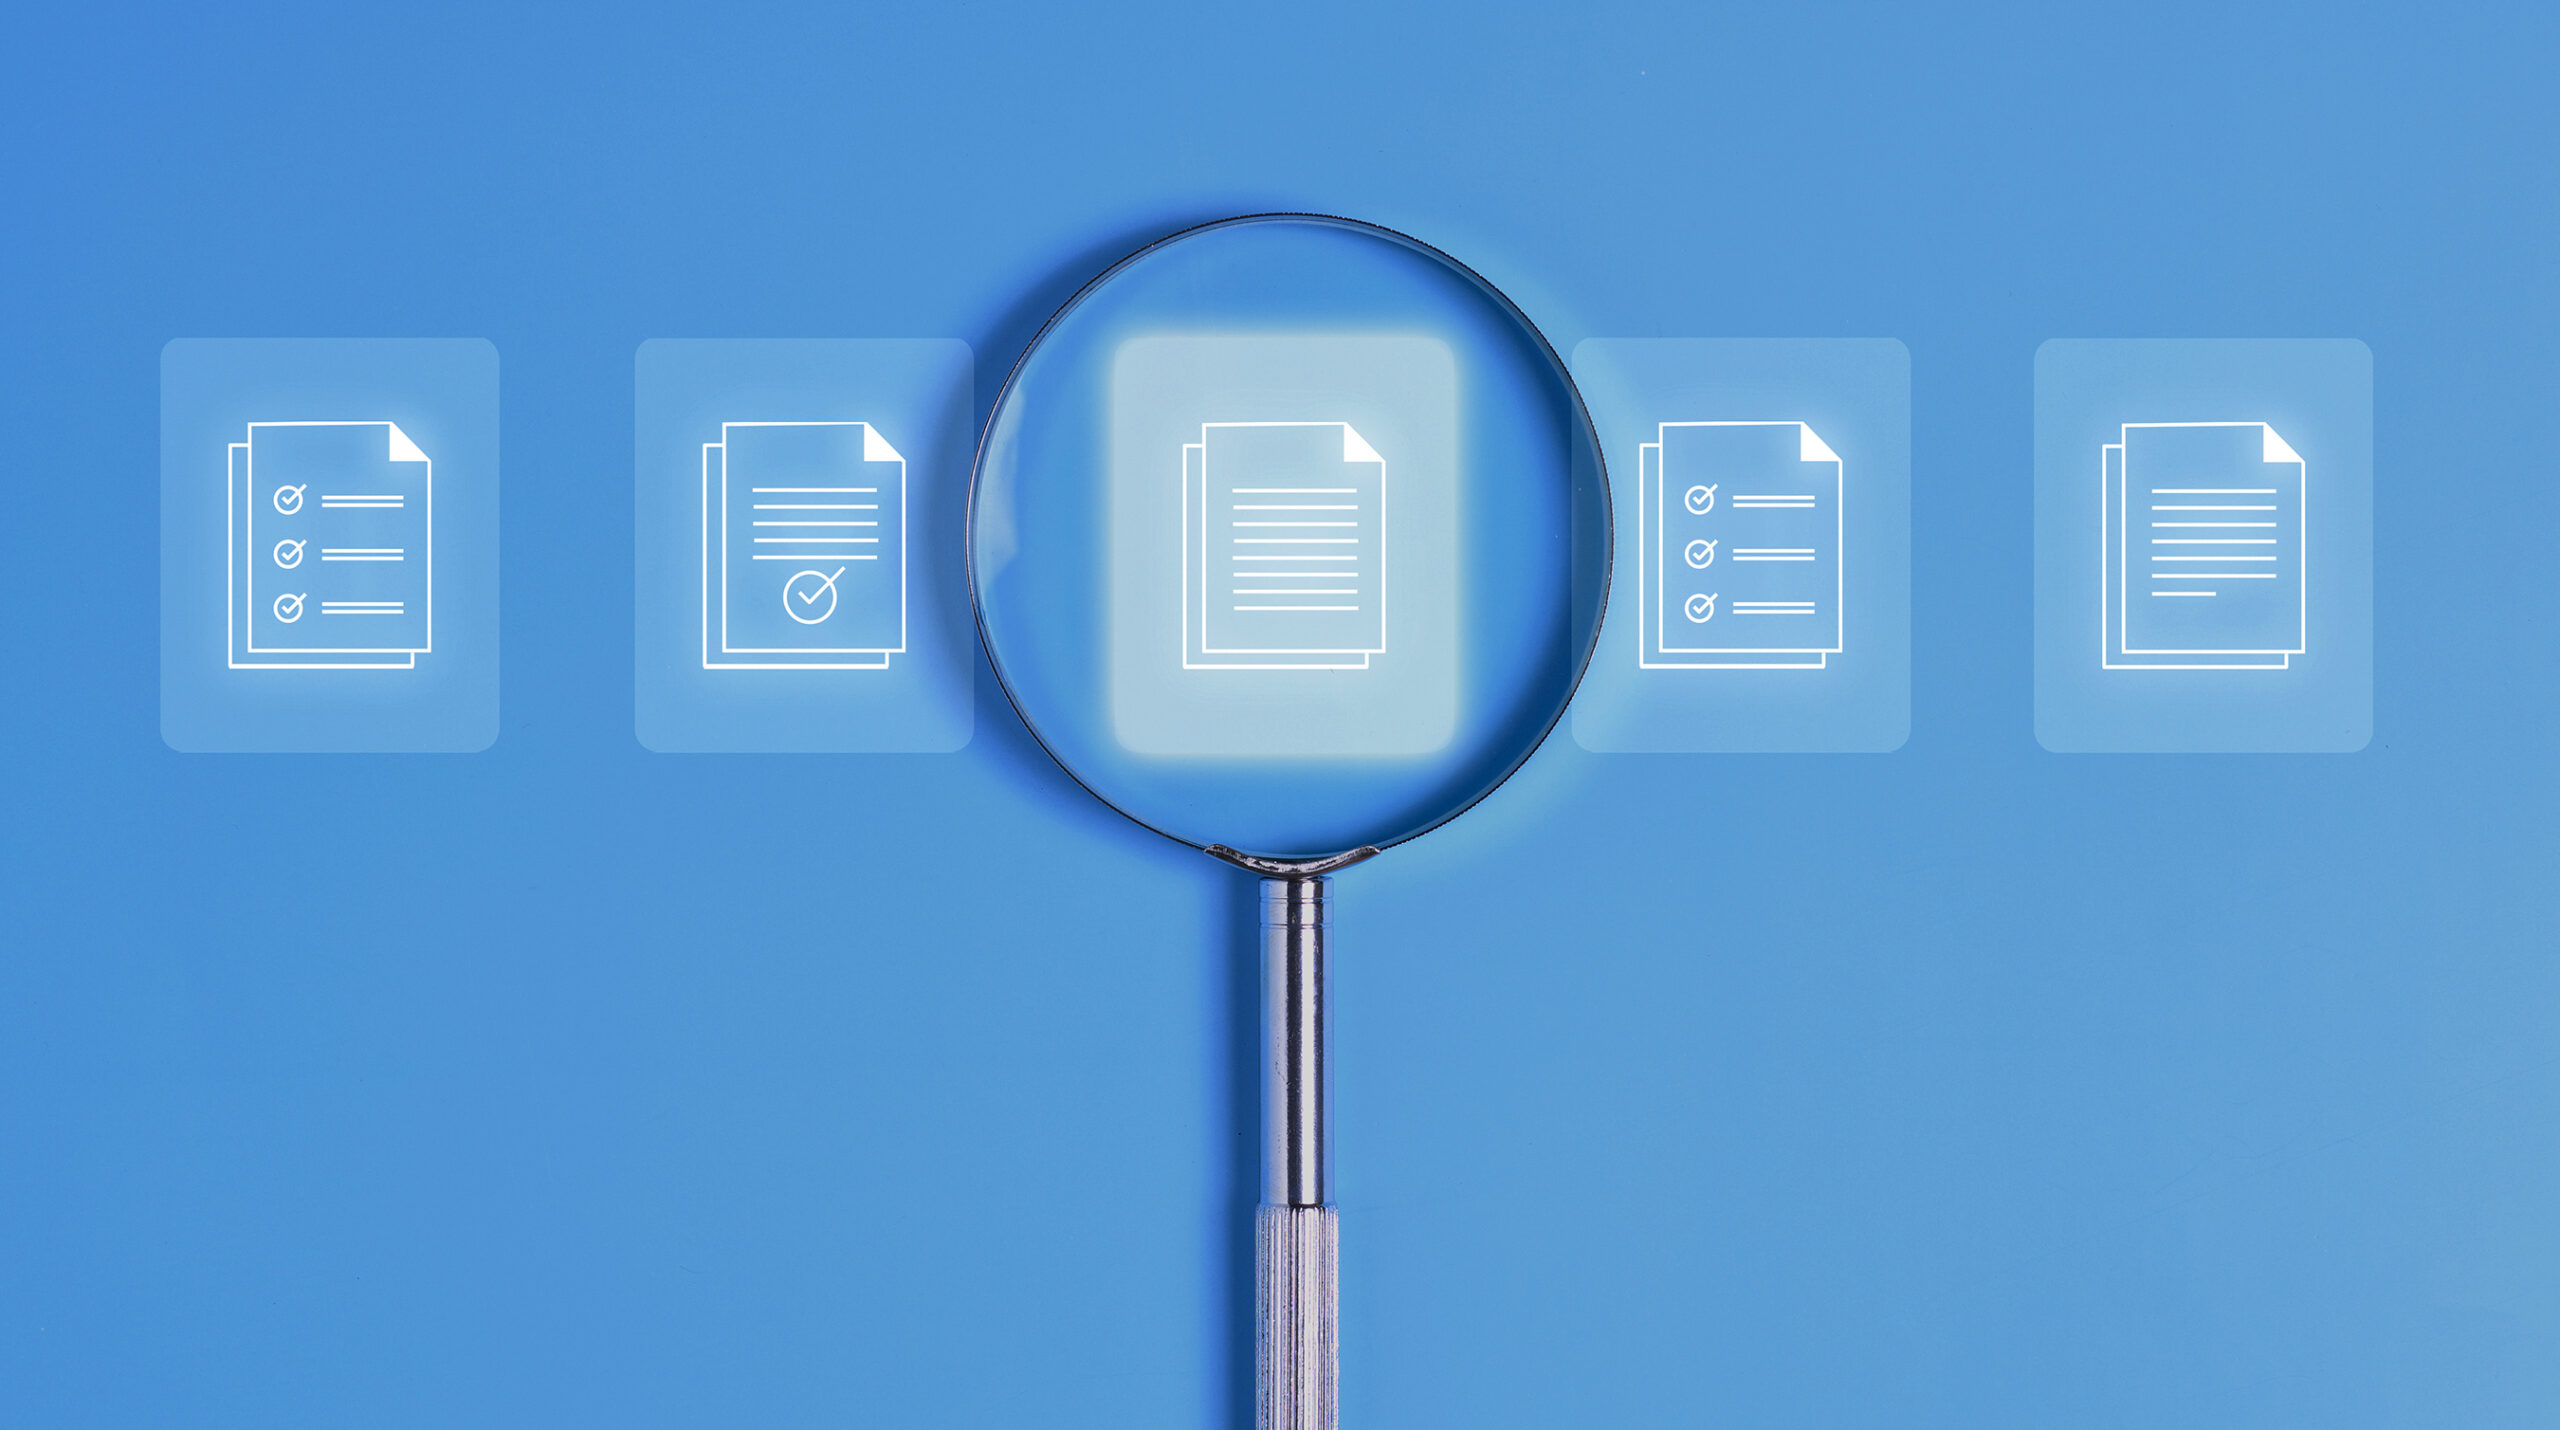 A line of five icons denoting documents of different types on a light blue background. The middle icon is highlighted and under a magnifying glass